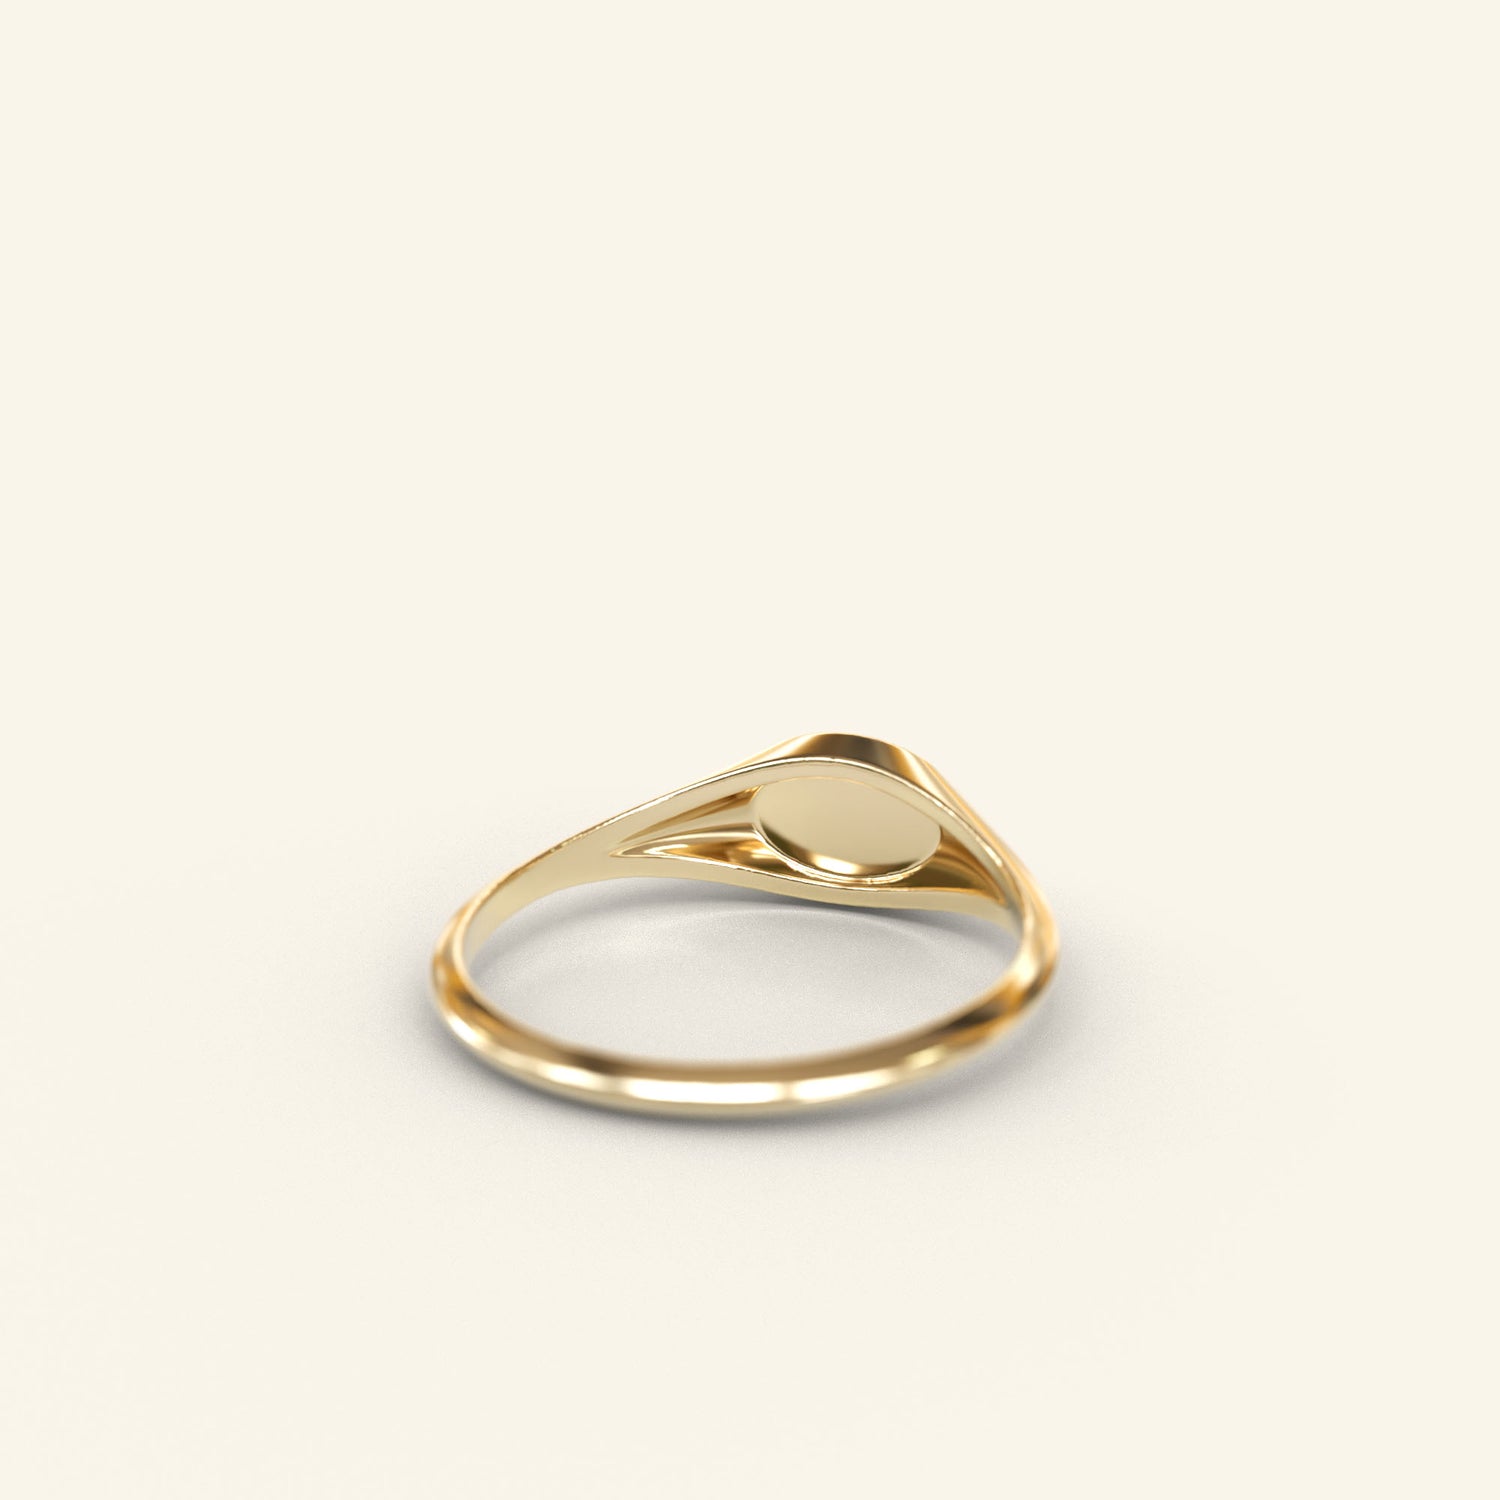 Tomwood mini signet oval gold ring 46